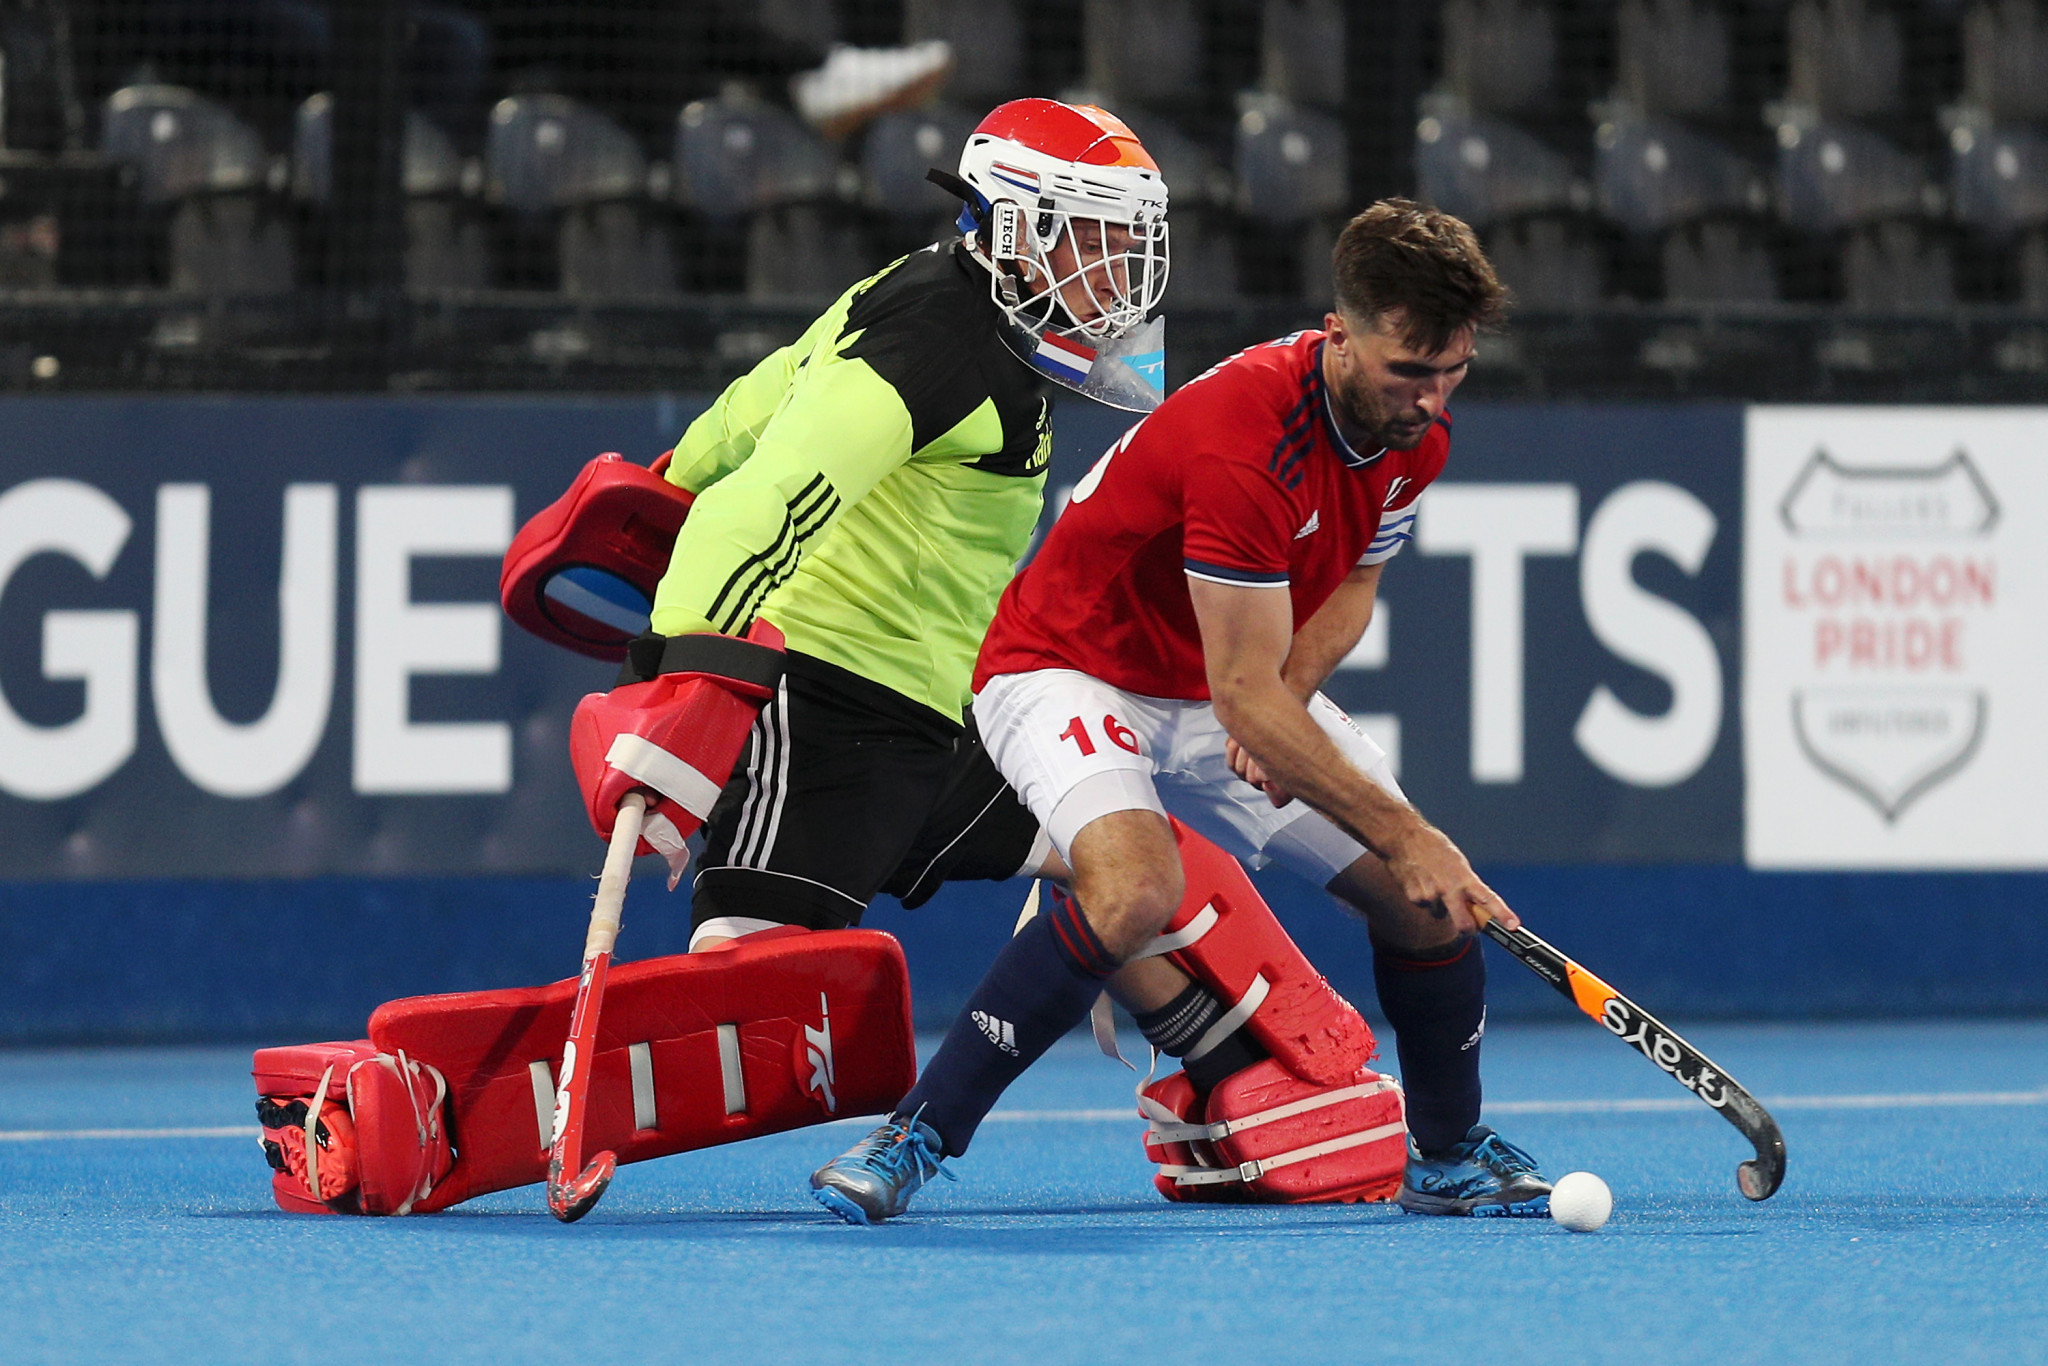 Netherlands beat Britain in shootout to move step closer to qualifying for FIH Pro League Grand Final